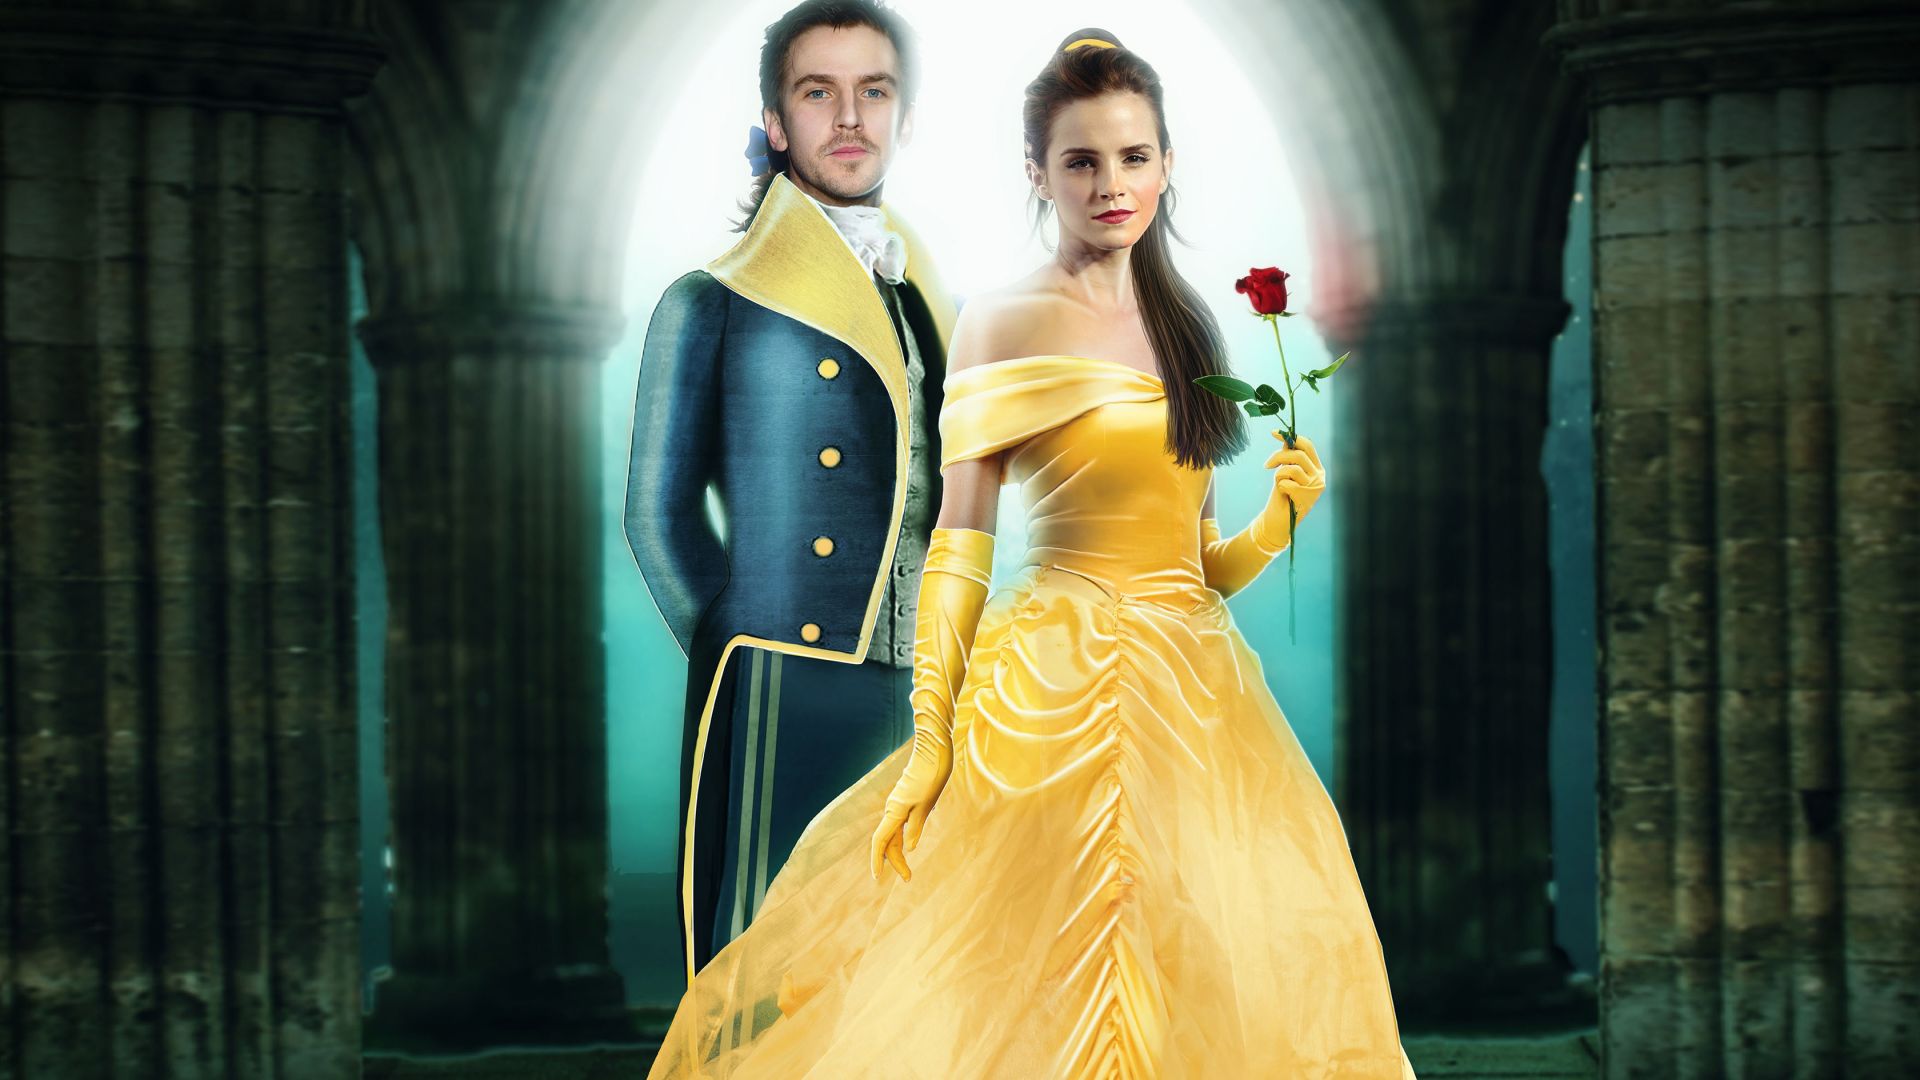 Wallpaper Dan stevens and emma watson in beauty and the beast movie